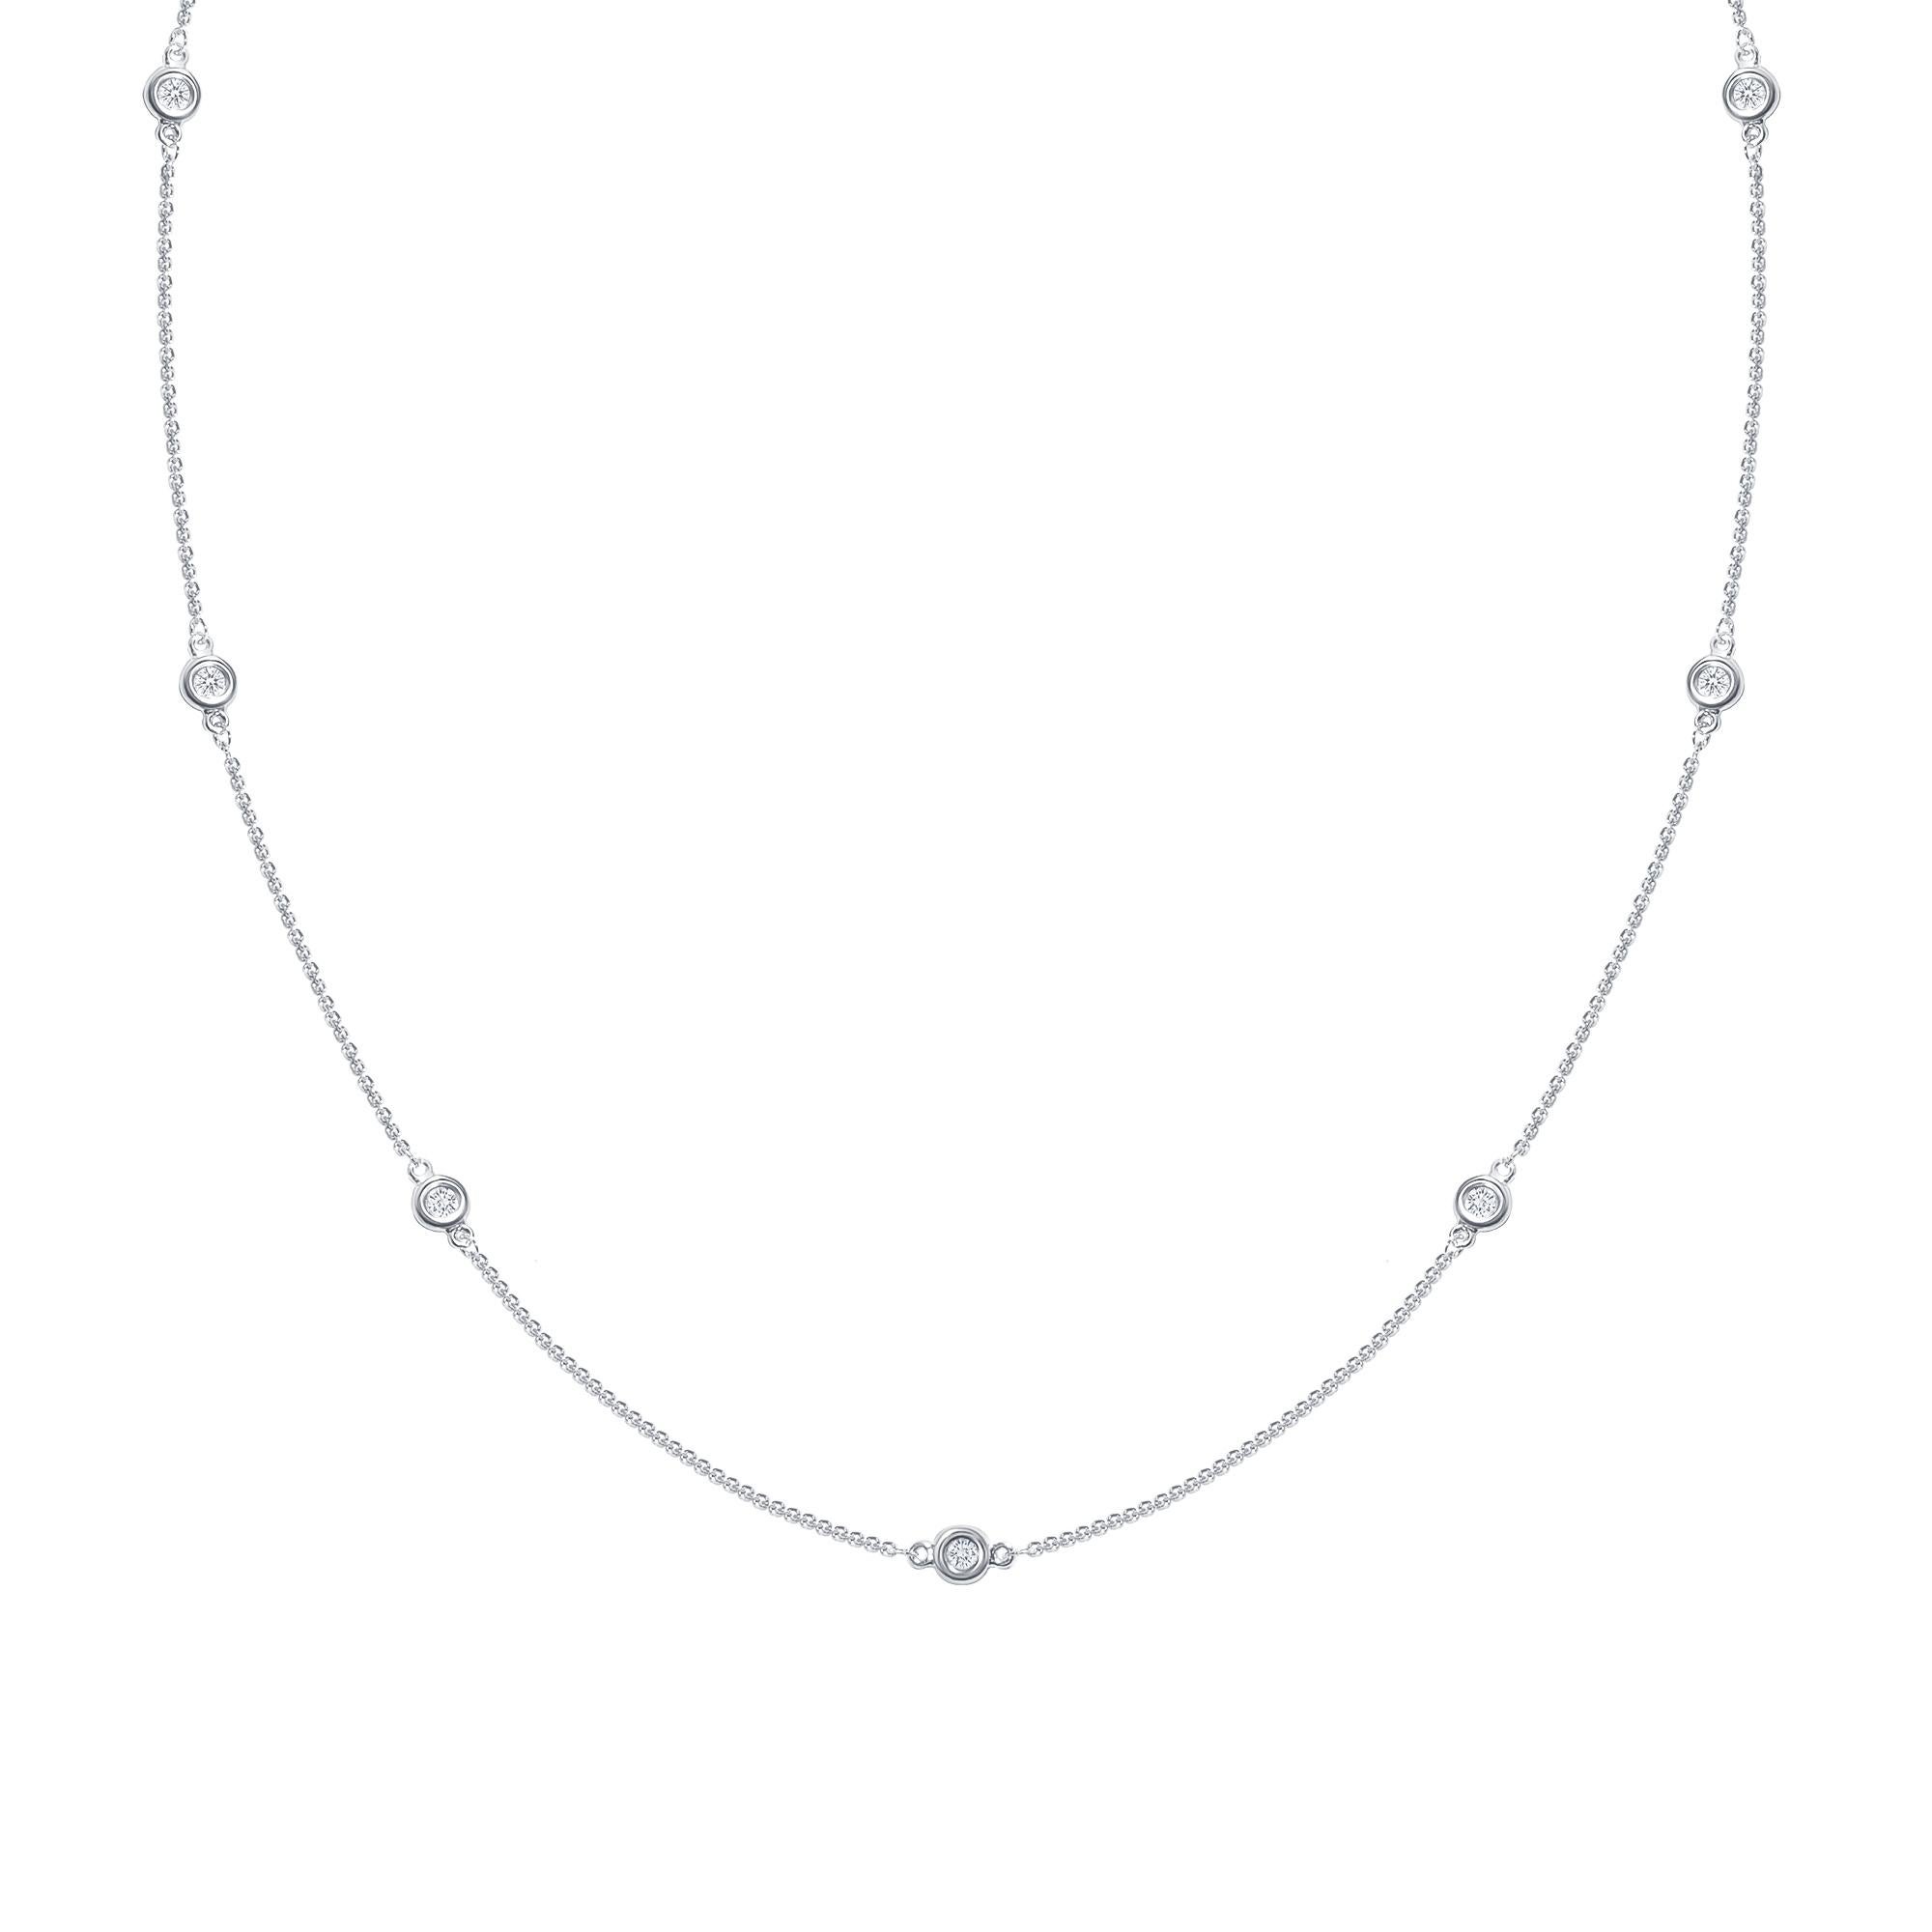 Eight elegant round diamonds set in a bezel setting along a 14k gold chain necklace.

Gold: 14K Gold
Number of Diamonds: Eight
Gold Color: White Gold
Carat: 2 Carat
Necklace Length: 22 Inches
Diamond Clarity: VS
Diamond Color: F
Chain Type: